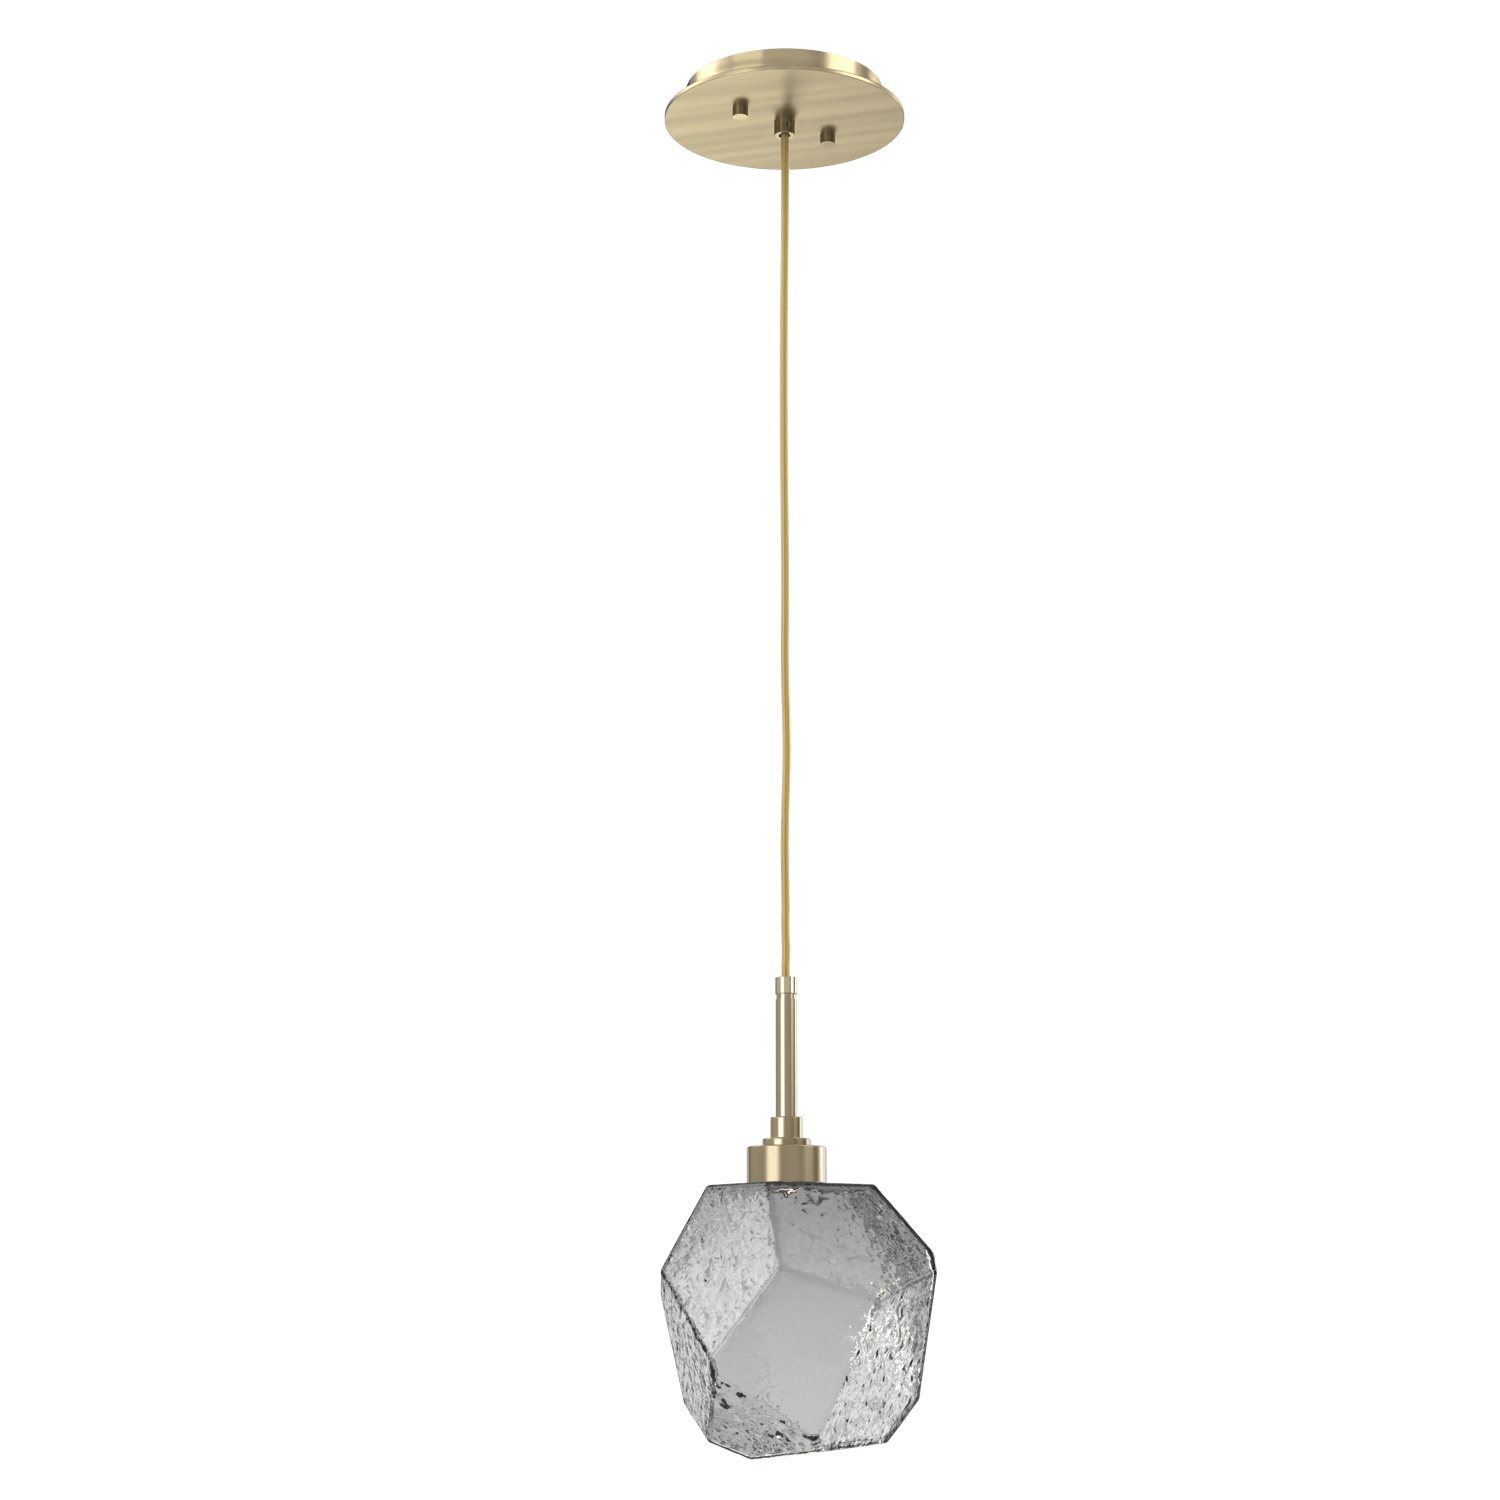 LAB0039-01-HB-S-Hammerton-Studio-Gem-pendant-light-with-heritage-brass-finish-and-smoke-blown-glass-shades-and-LED-lamping